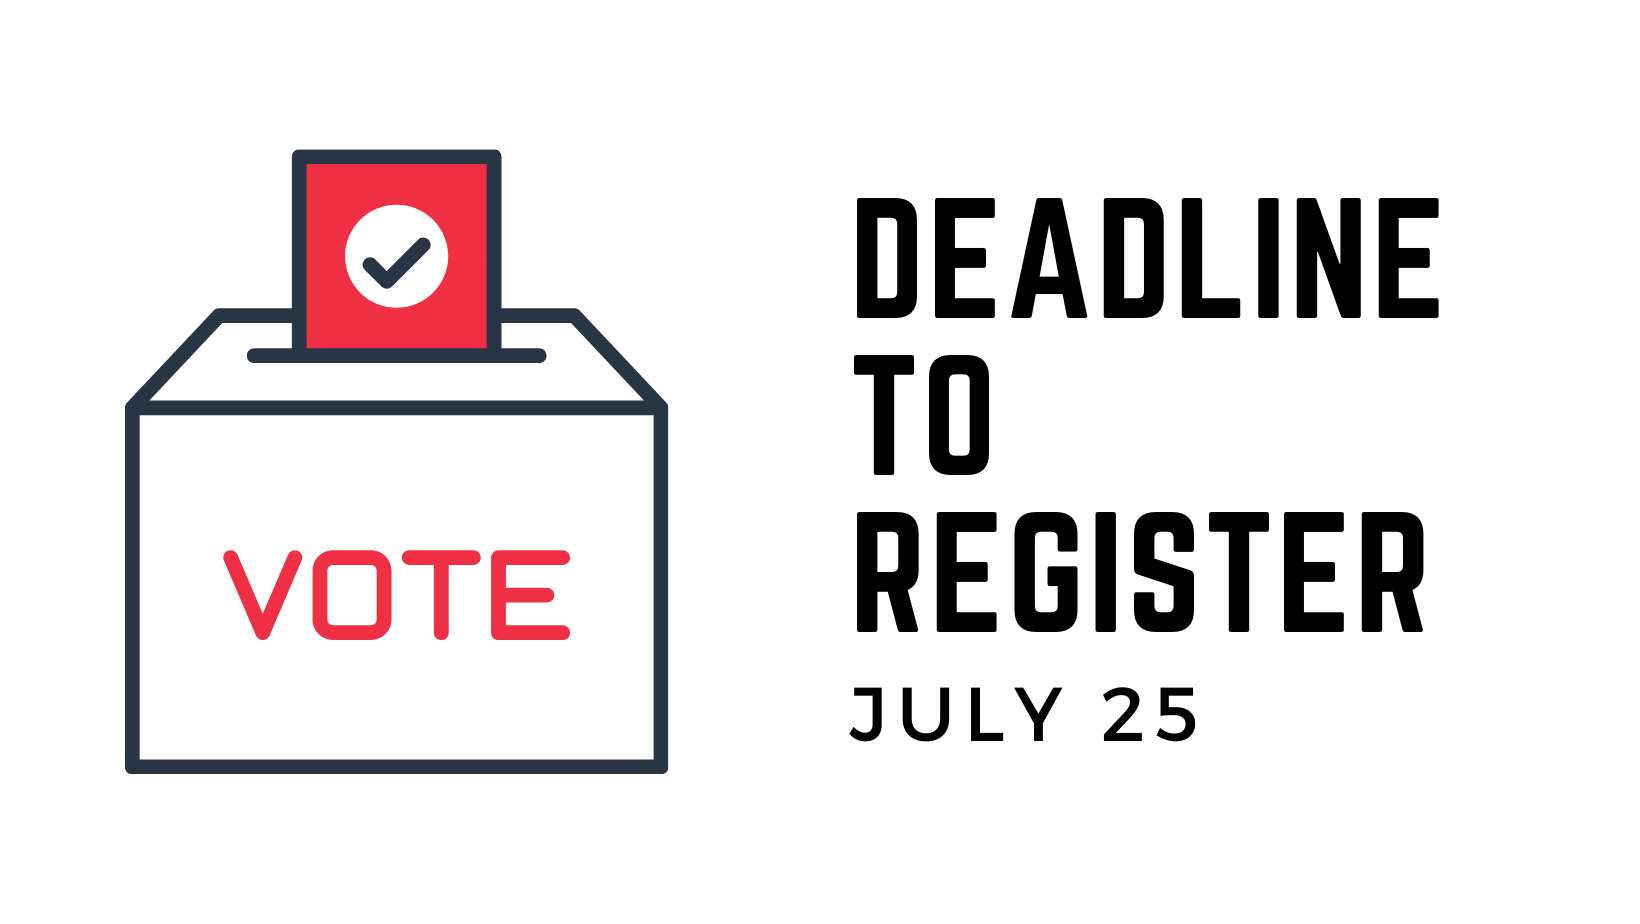 Ballot Box with Deadline to Register July 15